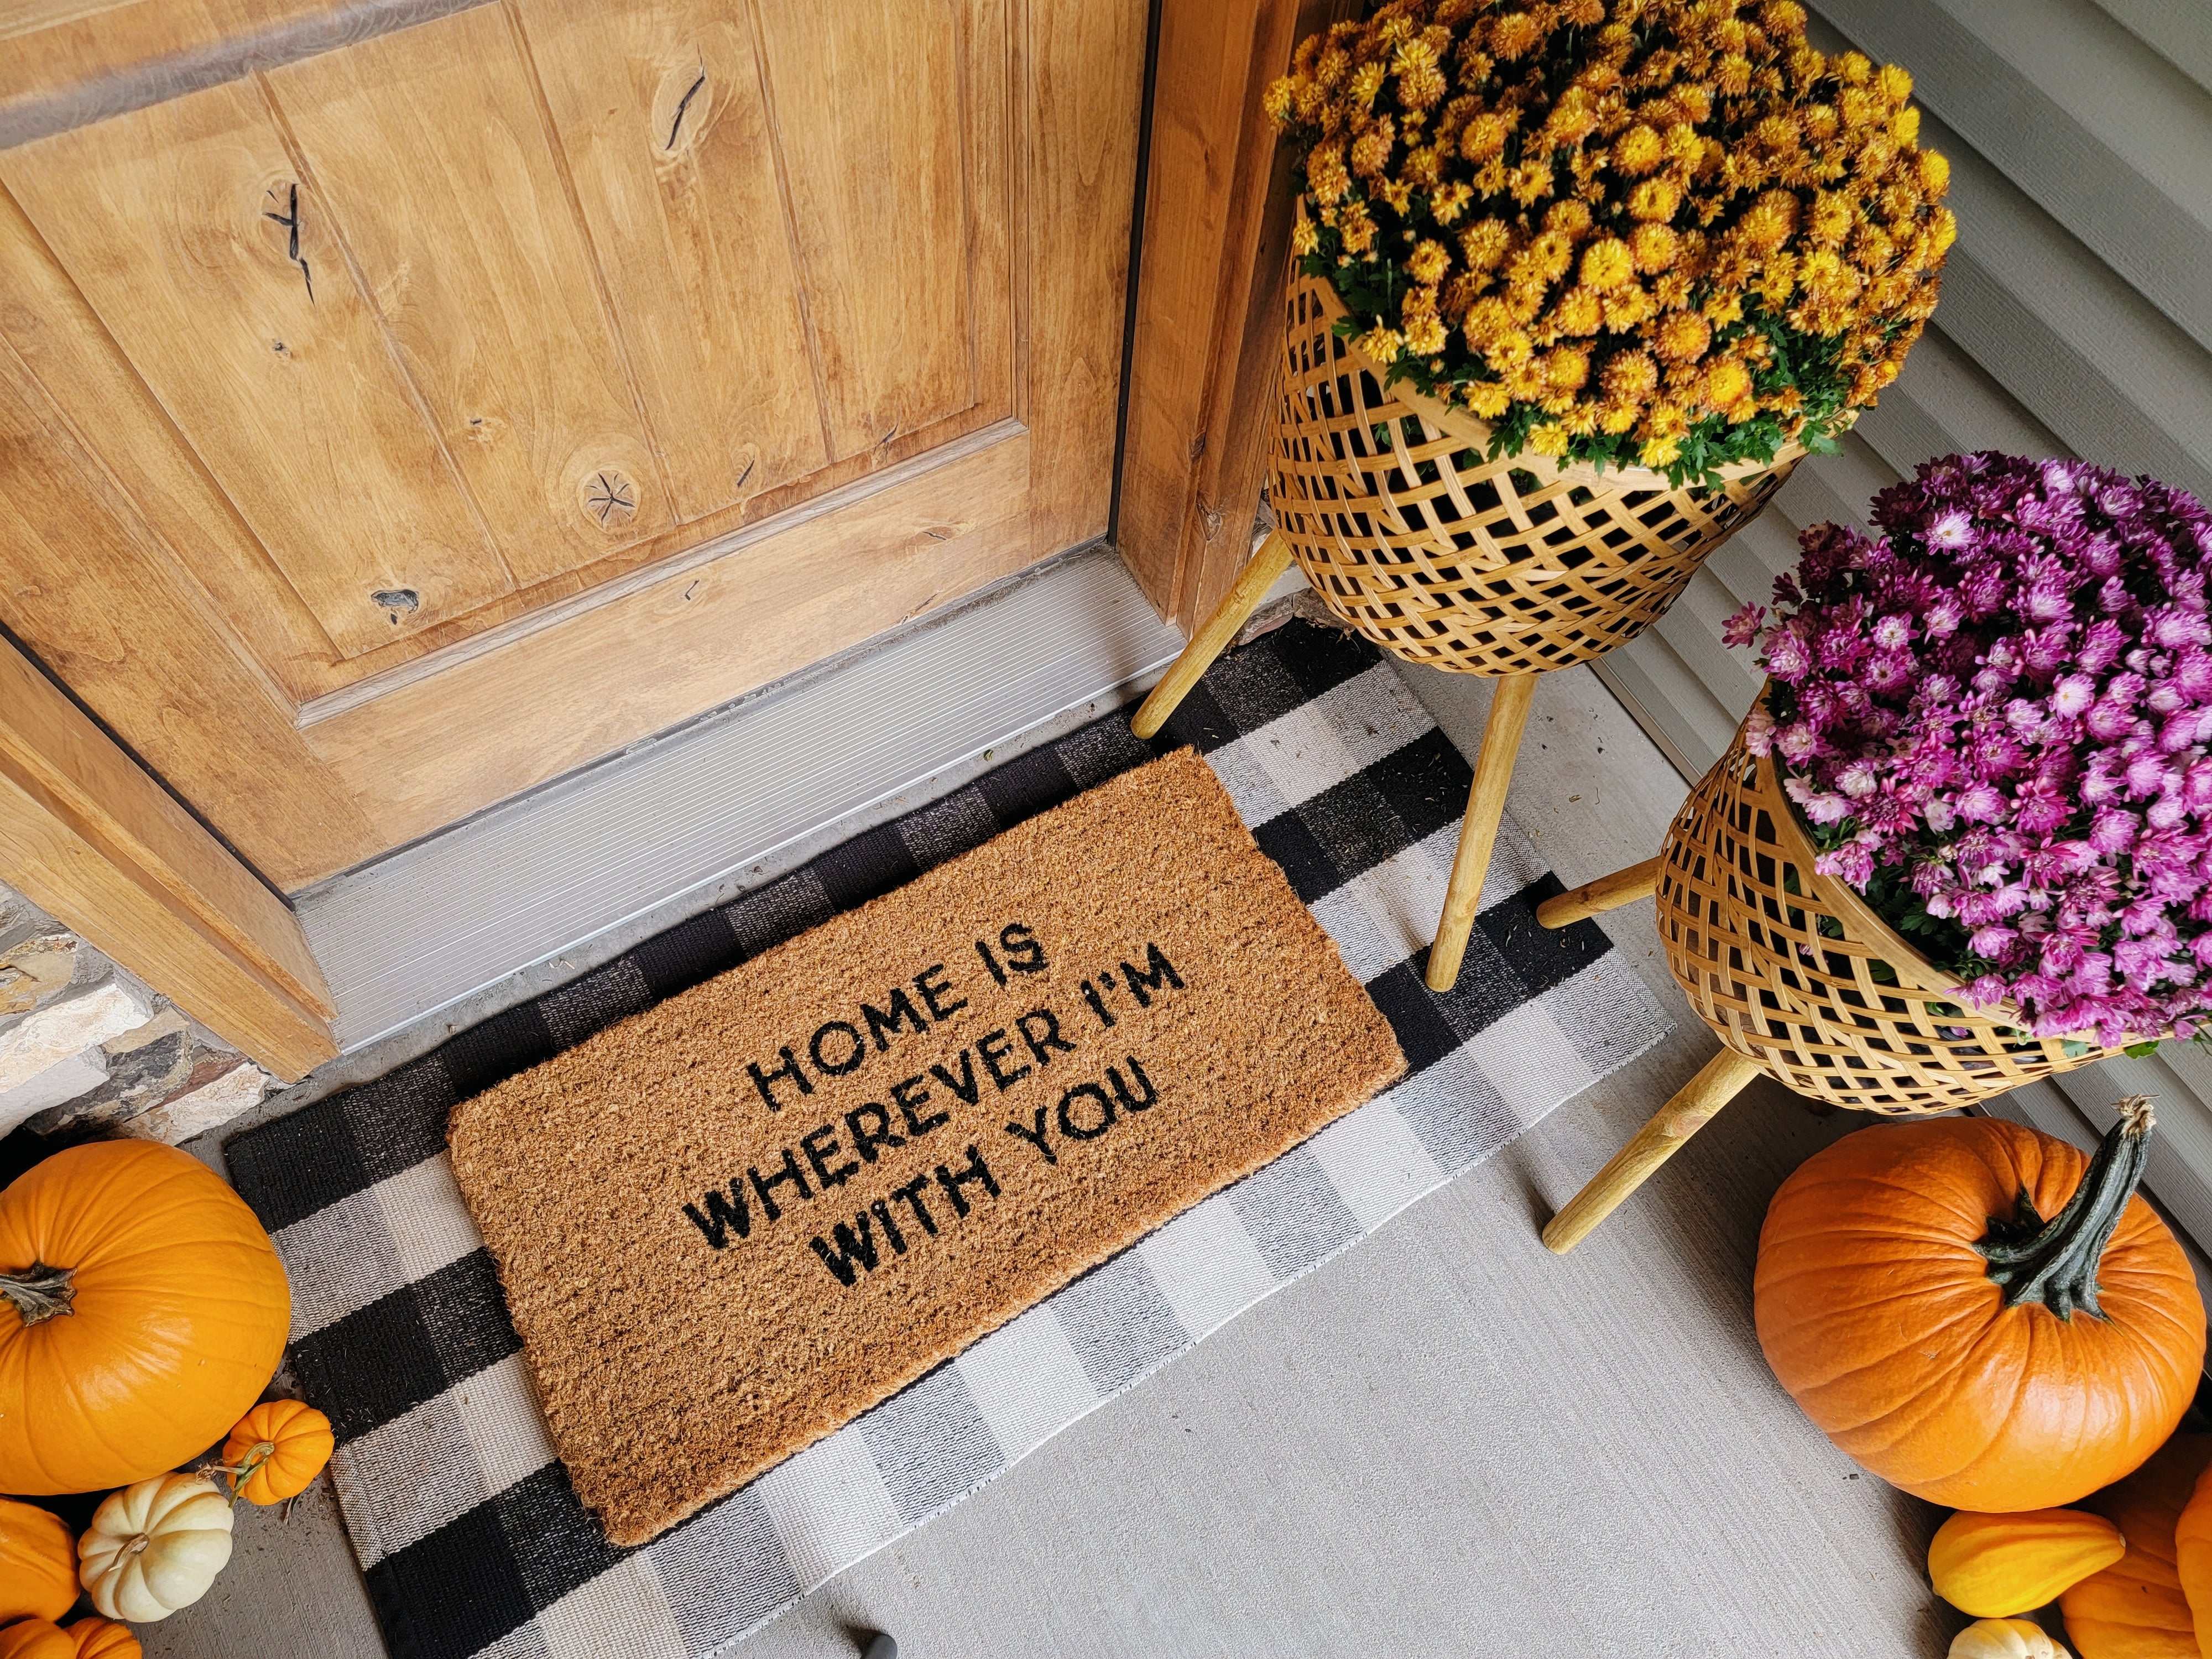 Home is Wherever I'm With You Doormat